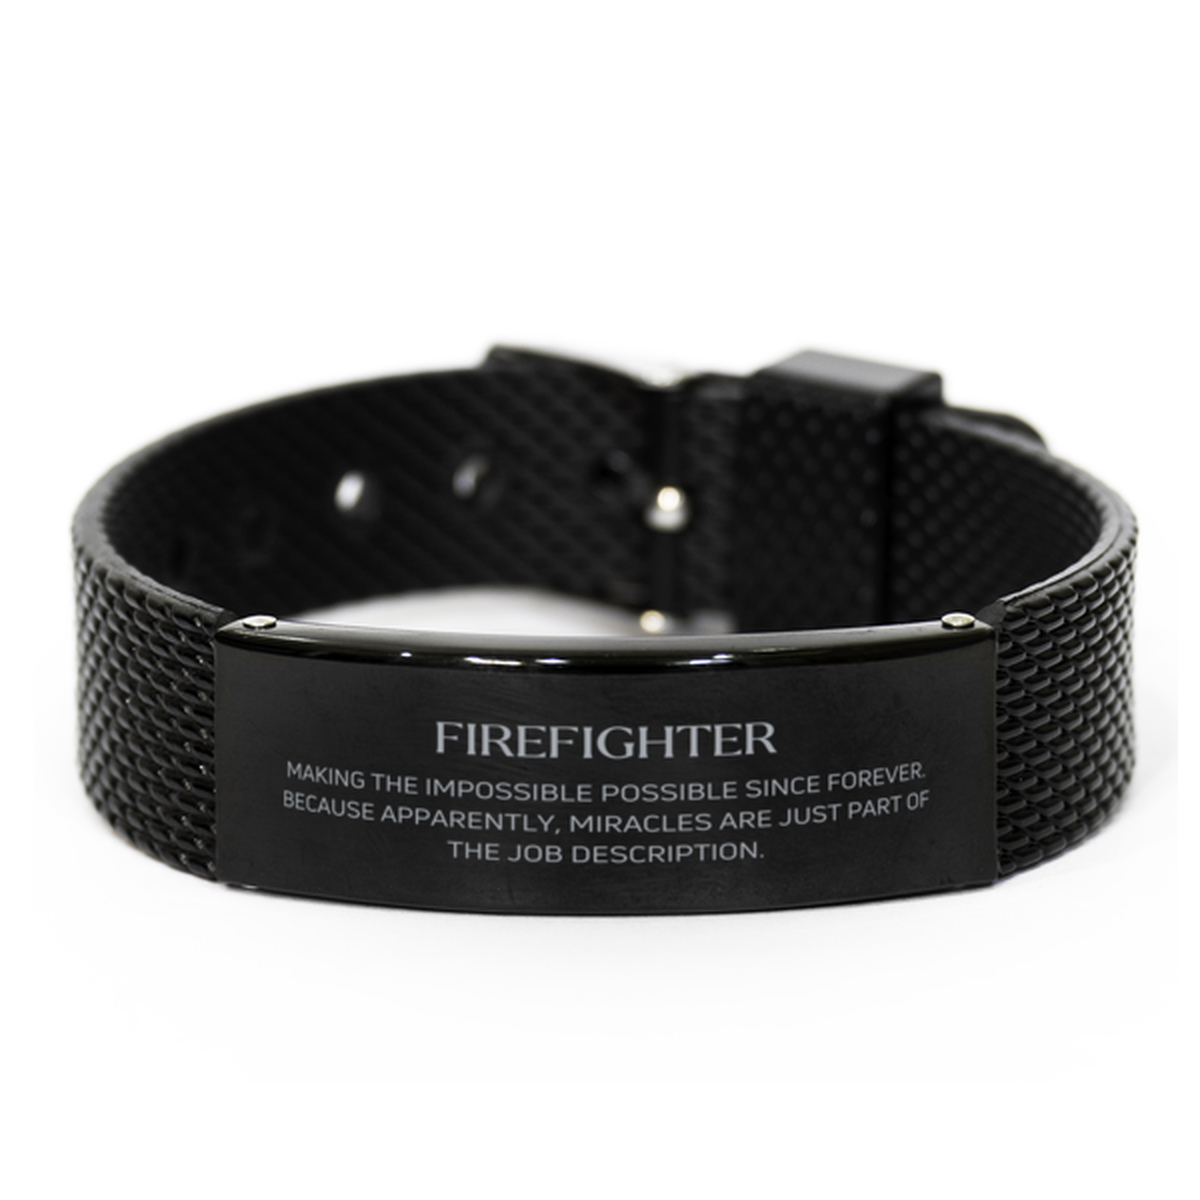 Funny Firefighter Gifts, Miracles are just part of the job description, Inspirational Birthday Black Shark Mesh Bracelet For Firefighter, Men, Women, Coworkers, Friends, Boss